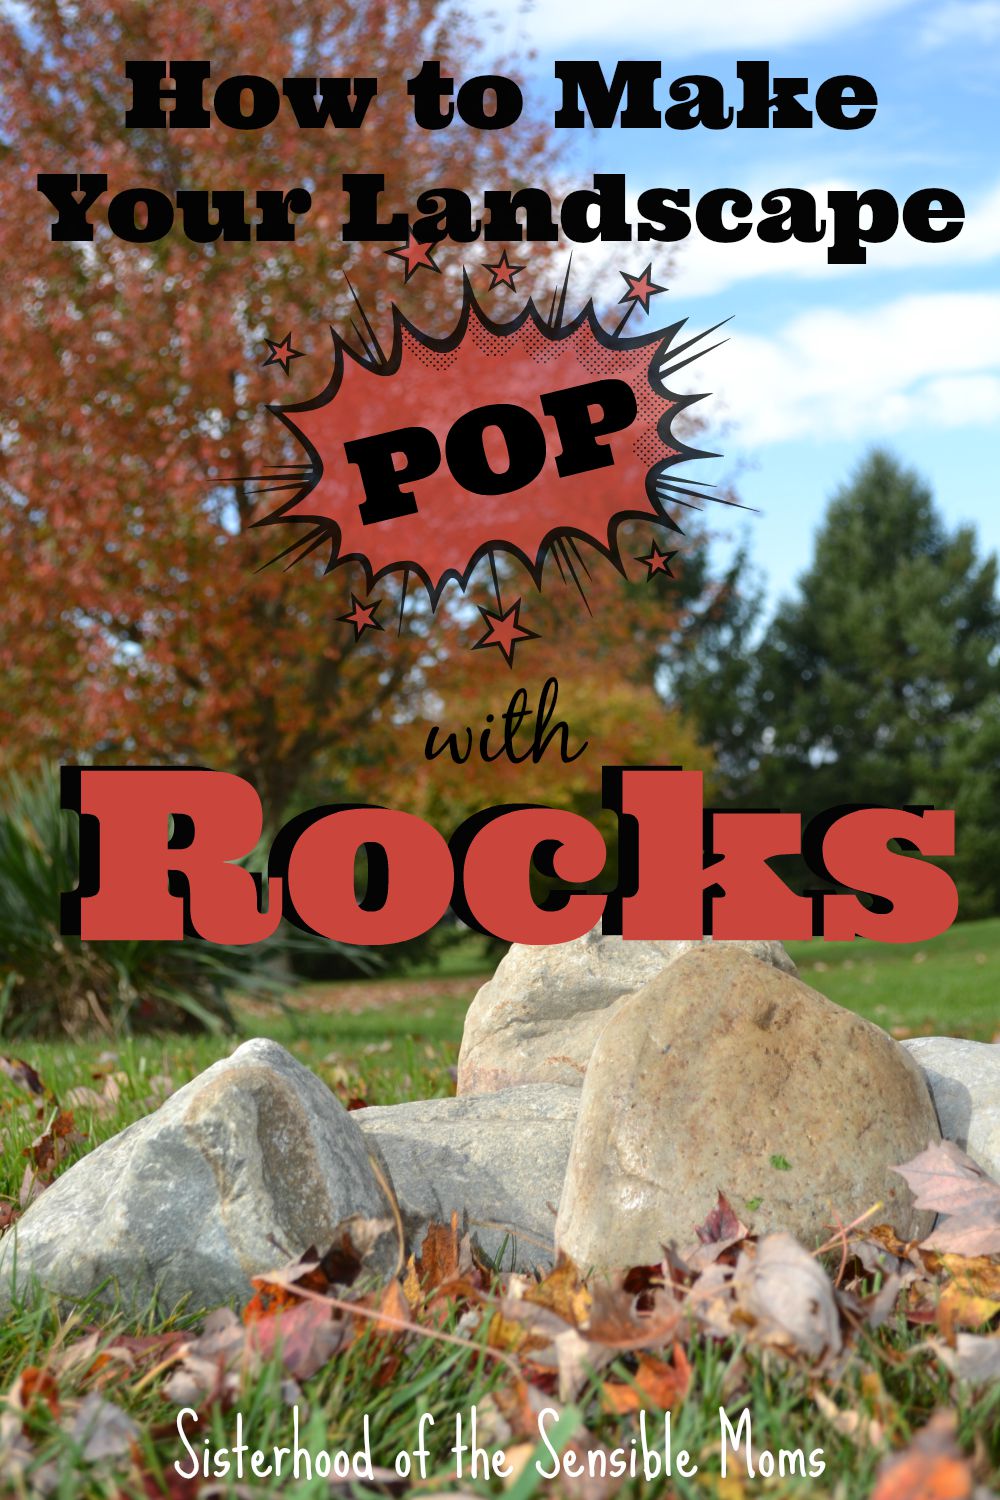 Fast and Easy! How to Make Your Landscape Pop With Rocks | DIY Garden Design Principles | Sisterhood of the Sensible Moms